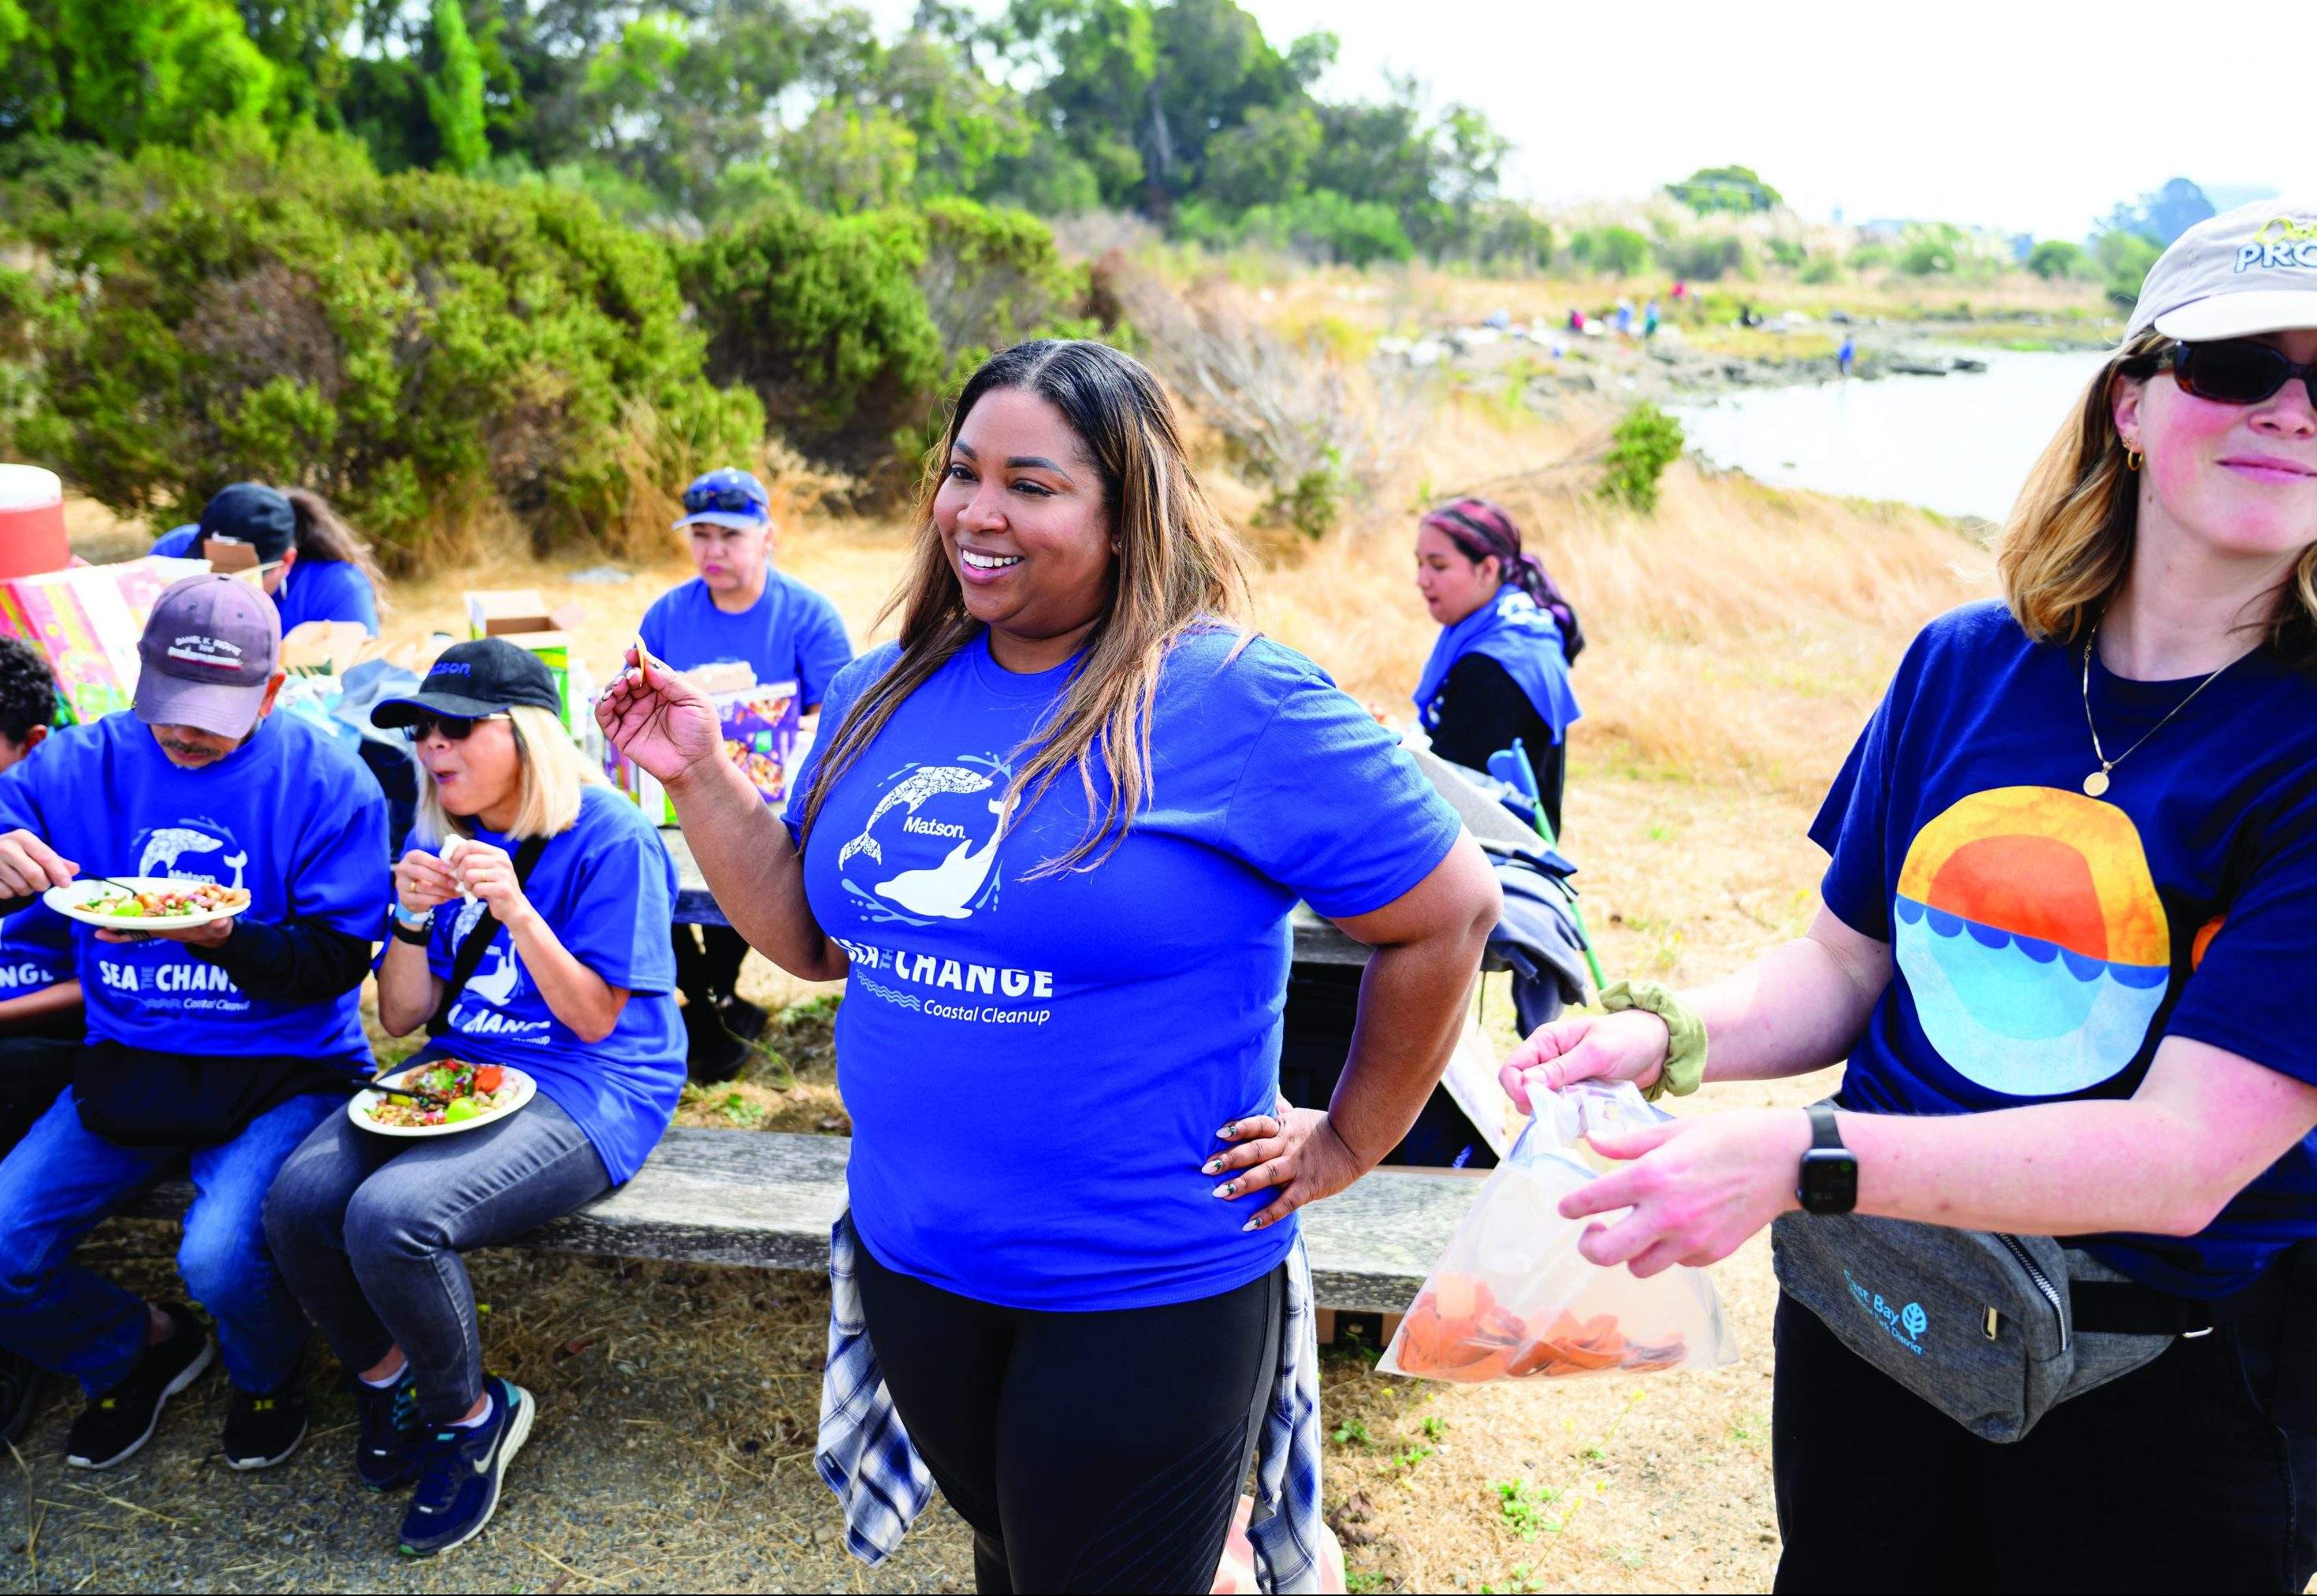 Denise stands with a raffle ticket in hands as volunteers wearing blue Matson "Sea The Change" t-shirts sit on a picnic table behind her eating.